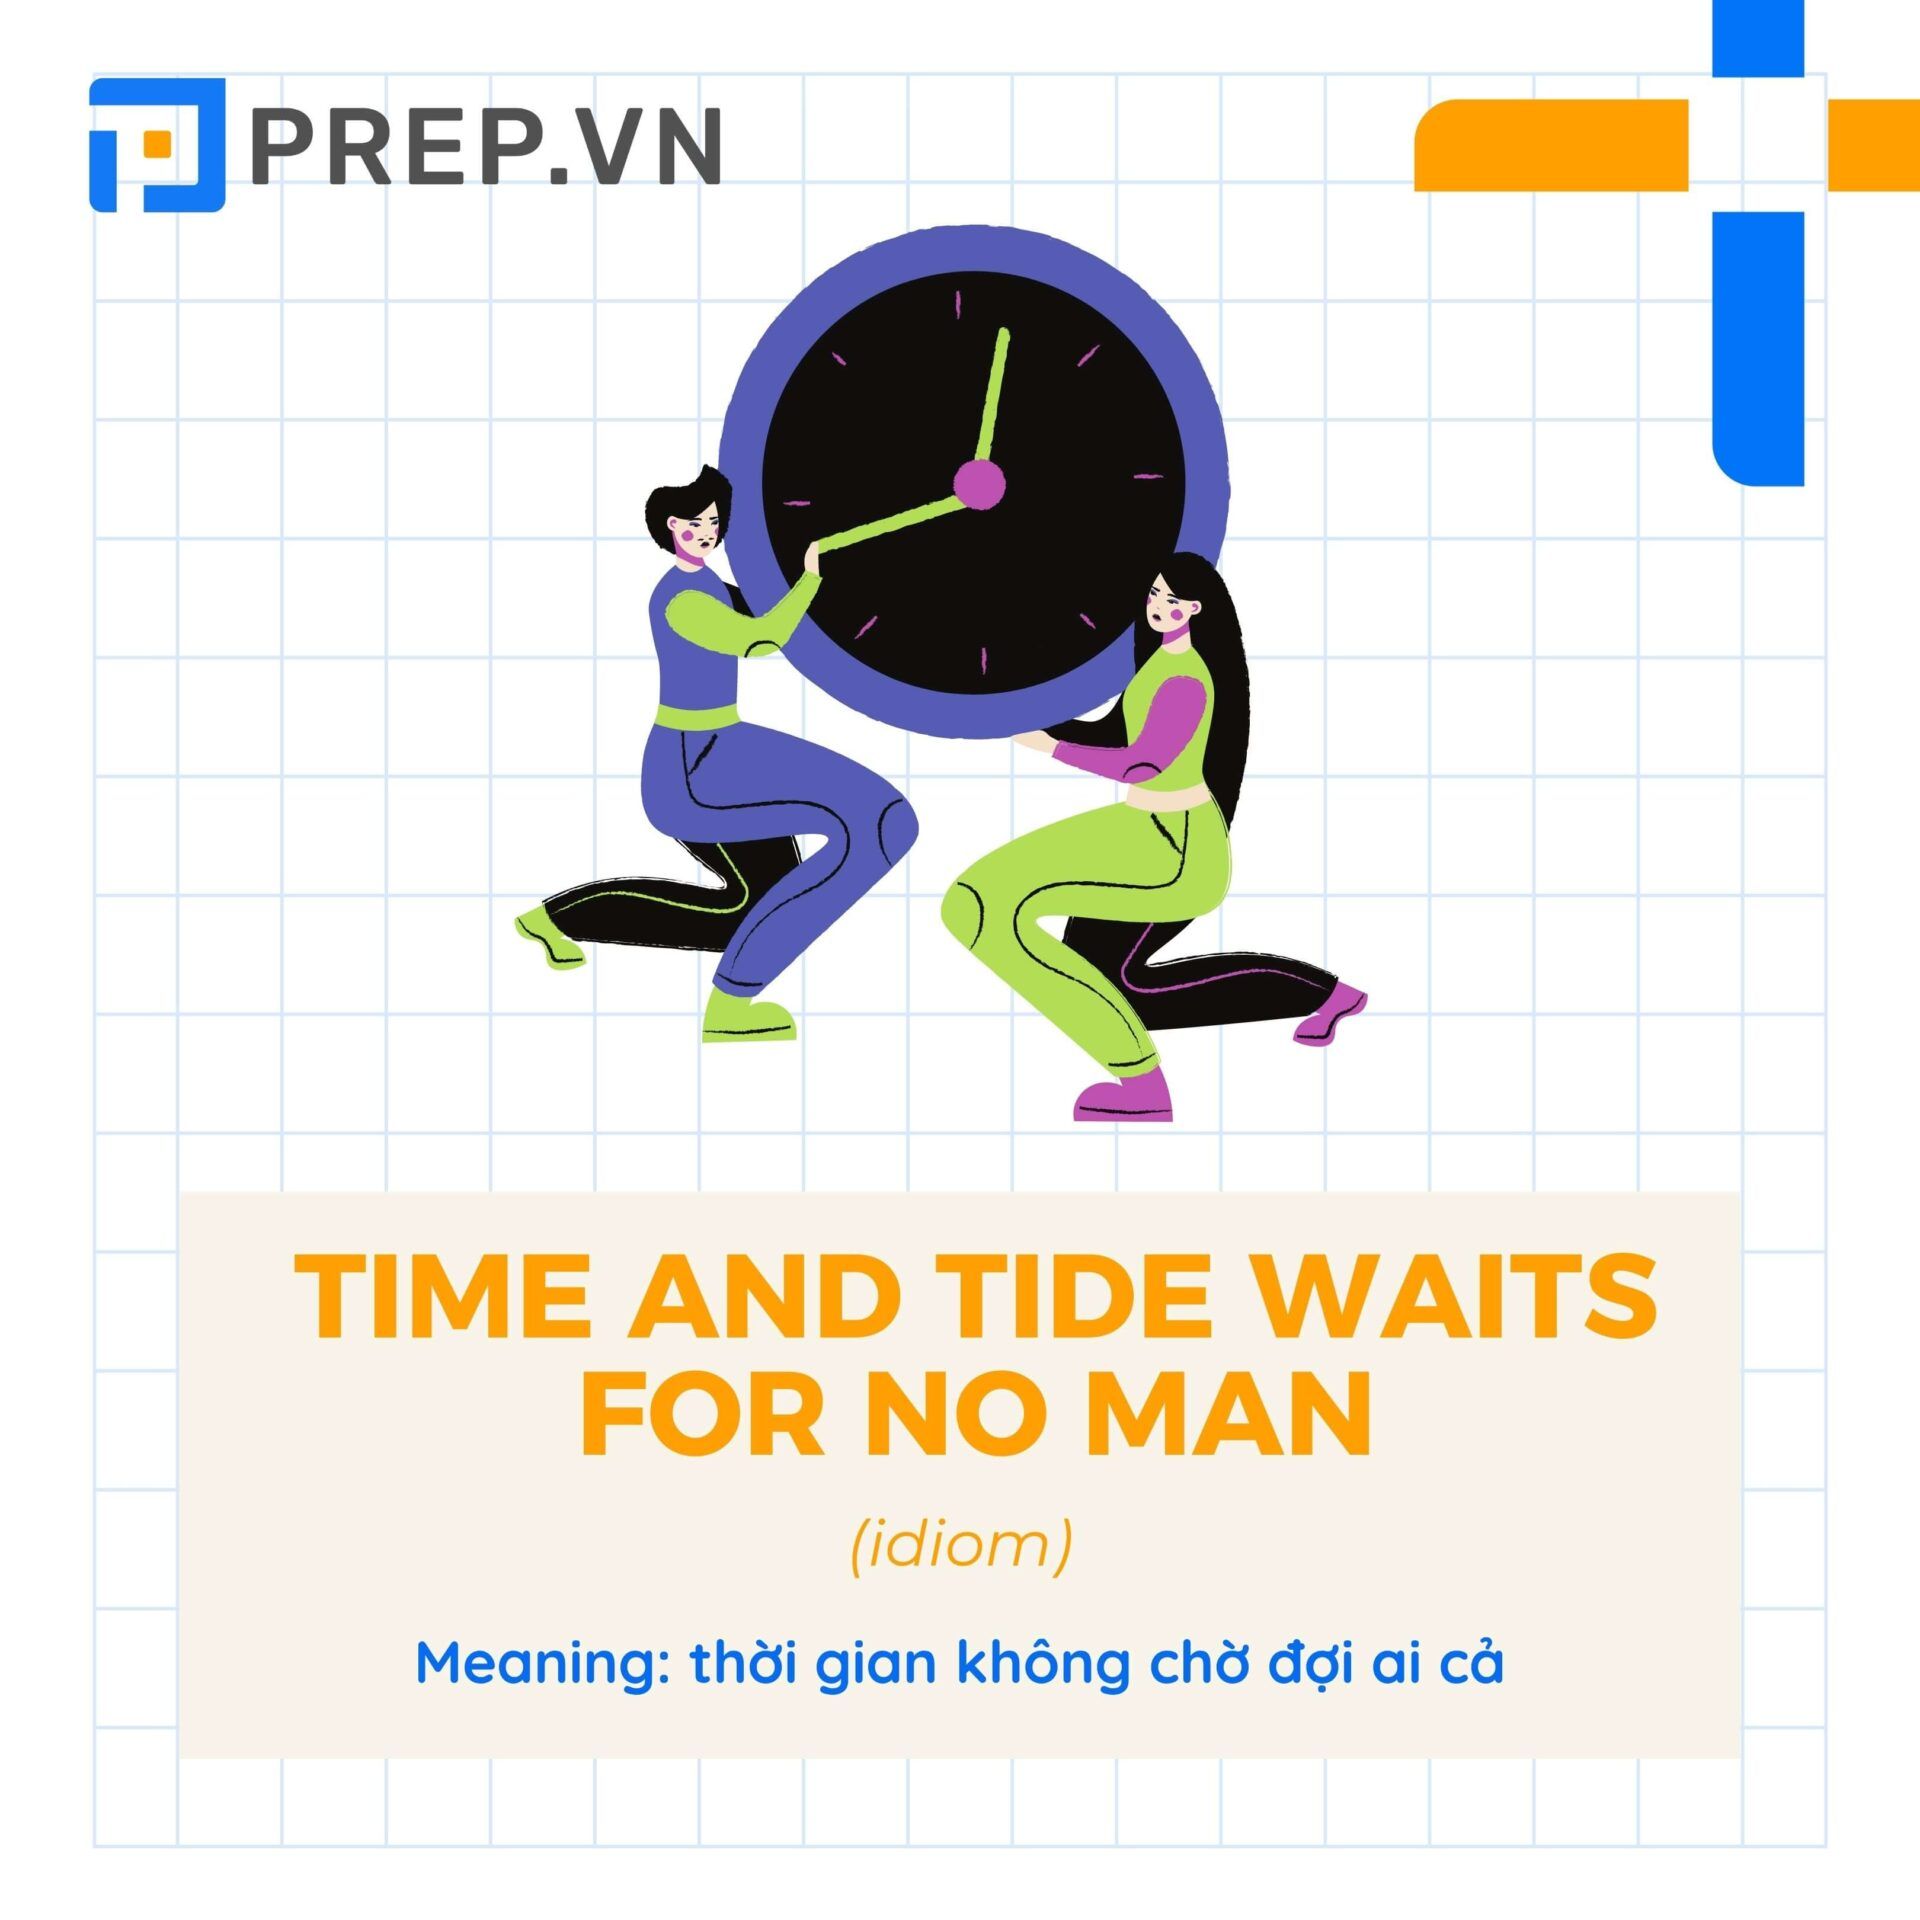 Time and tide waits for no man